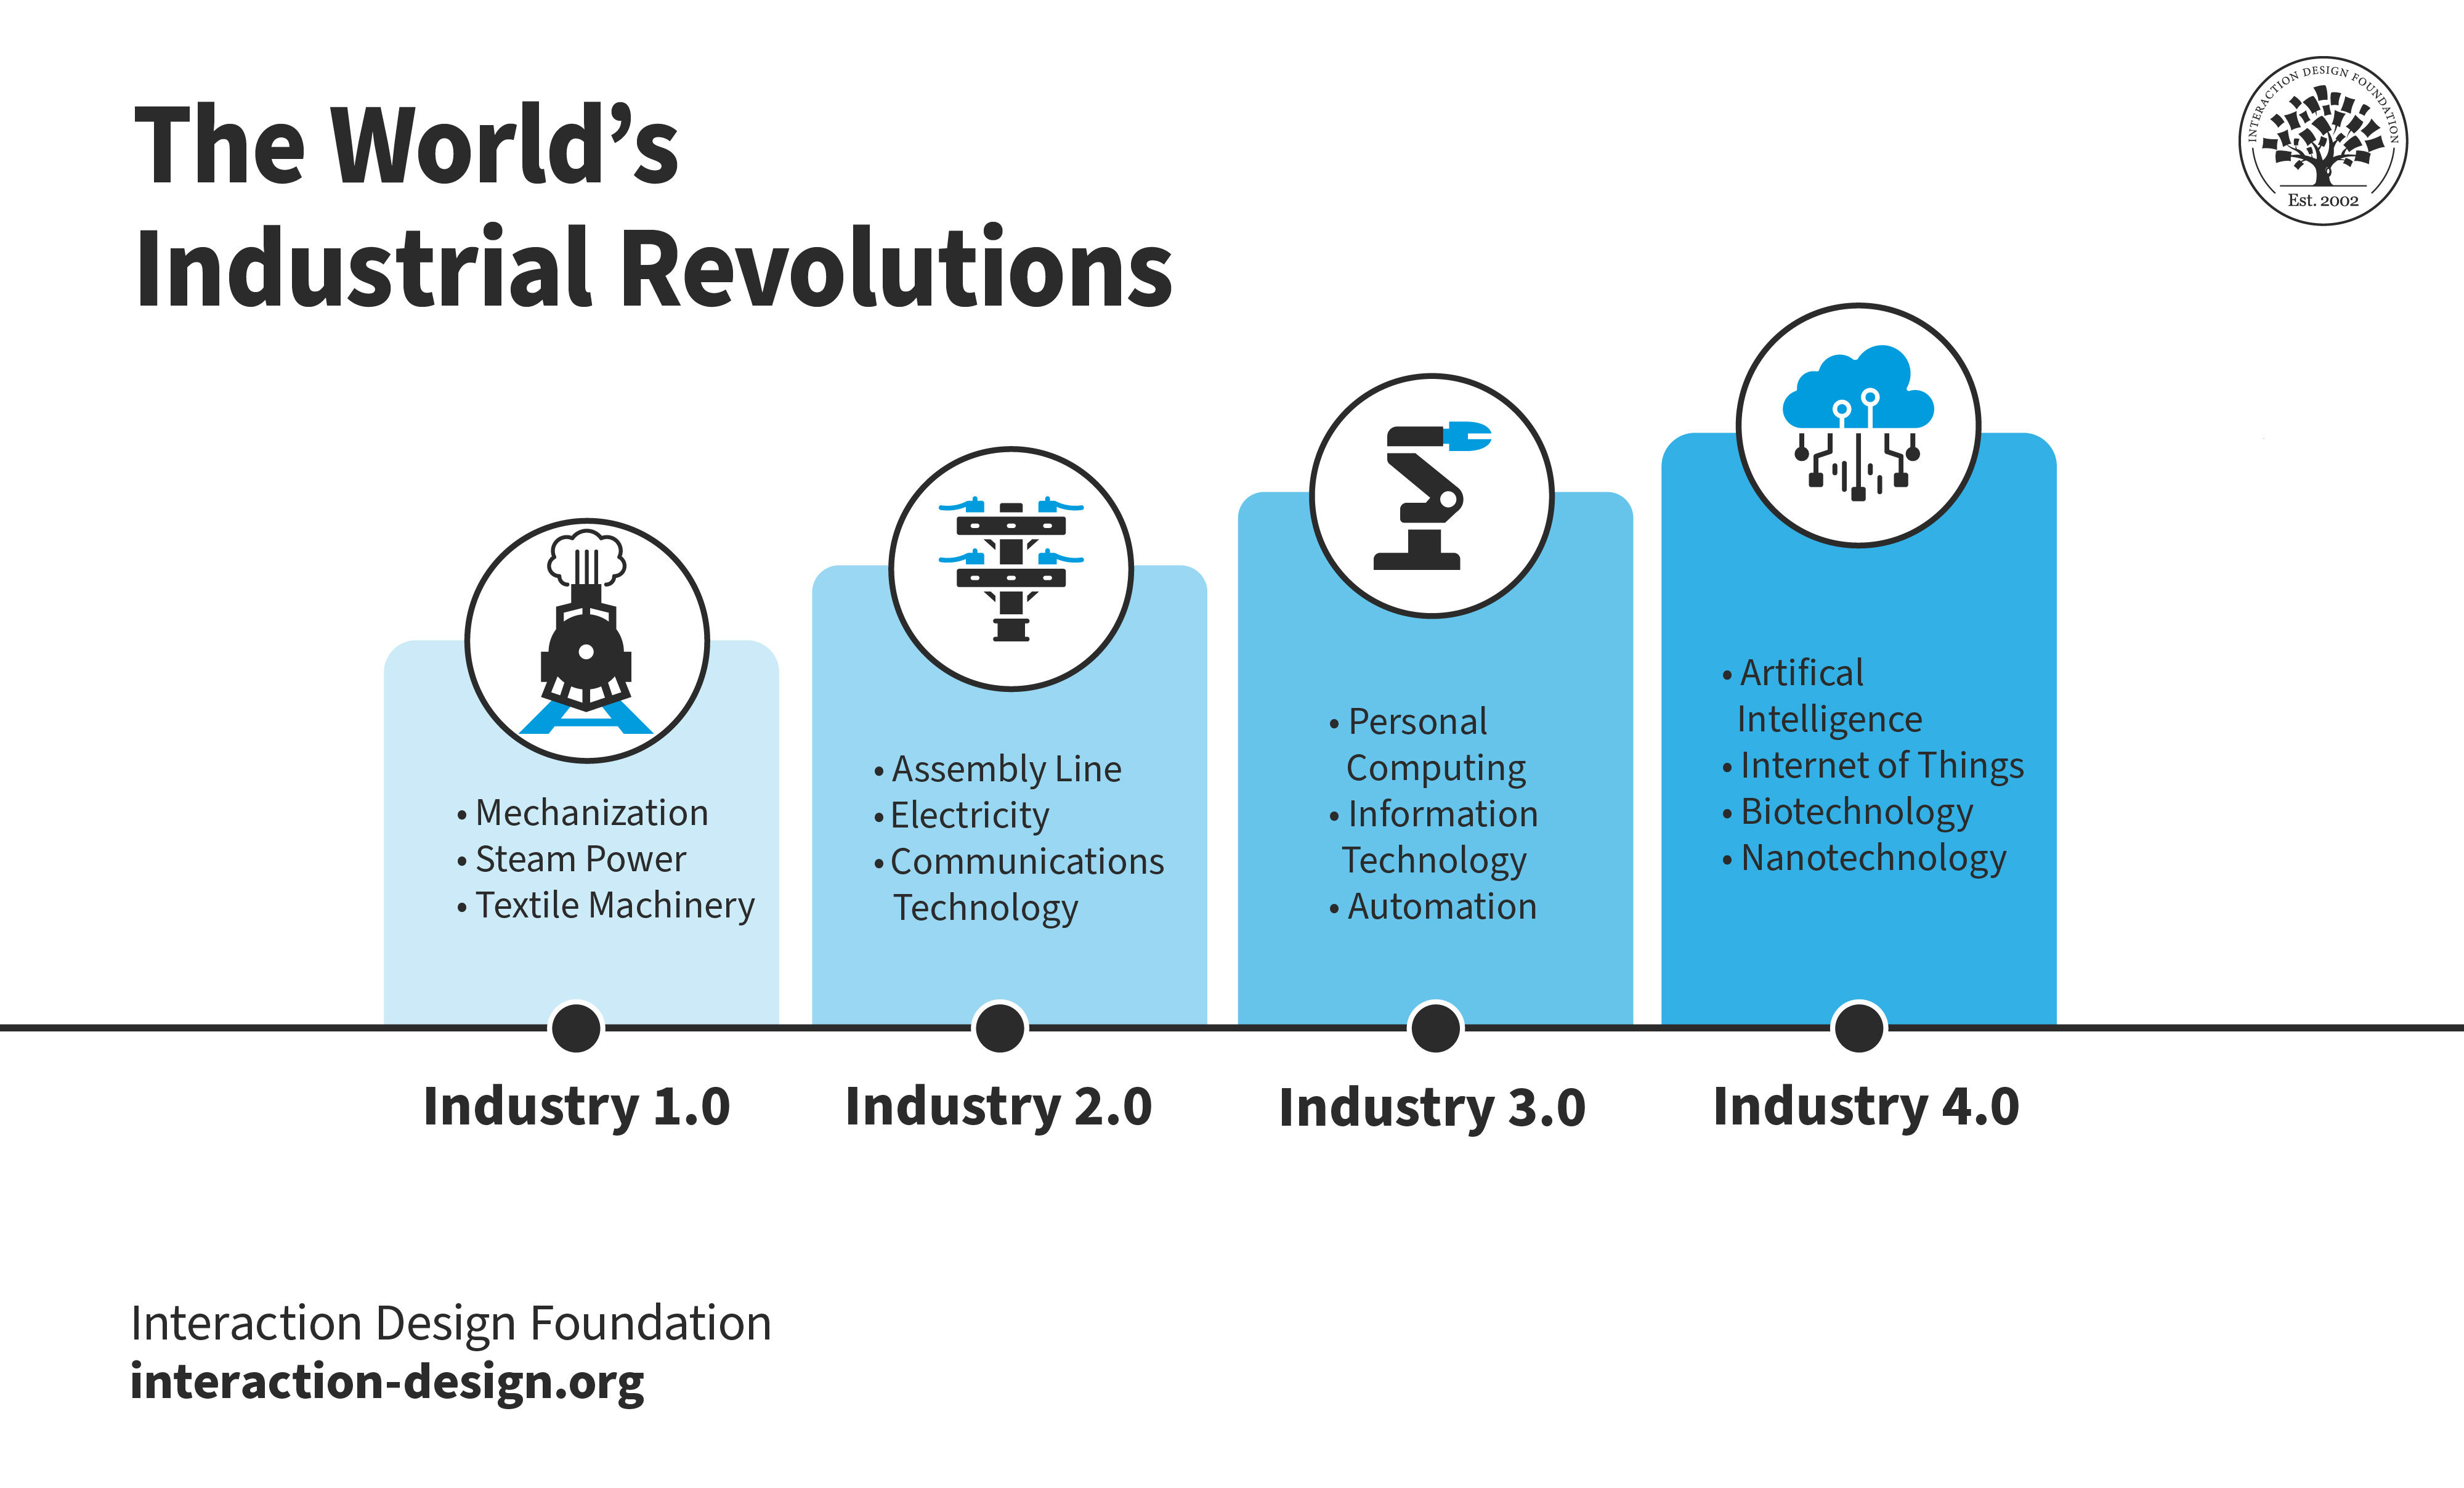 An illustration showing all the industrial revolutions and their key technologies